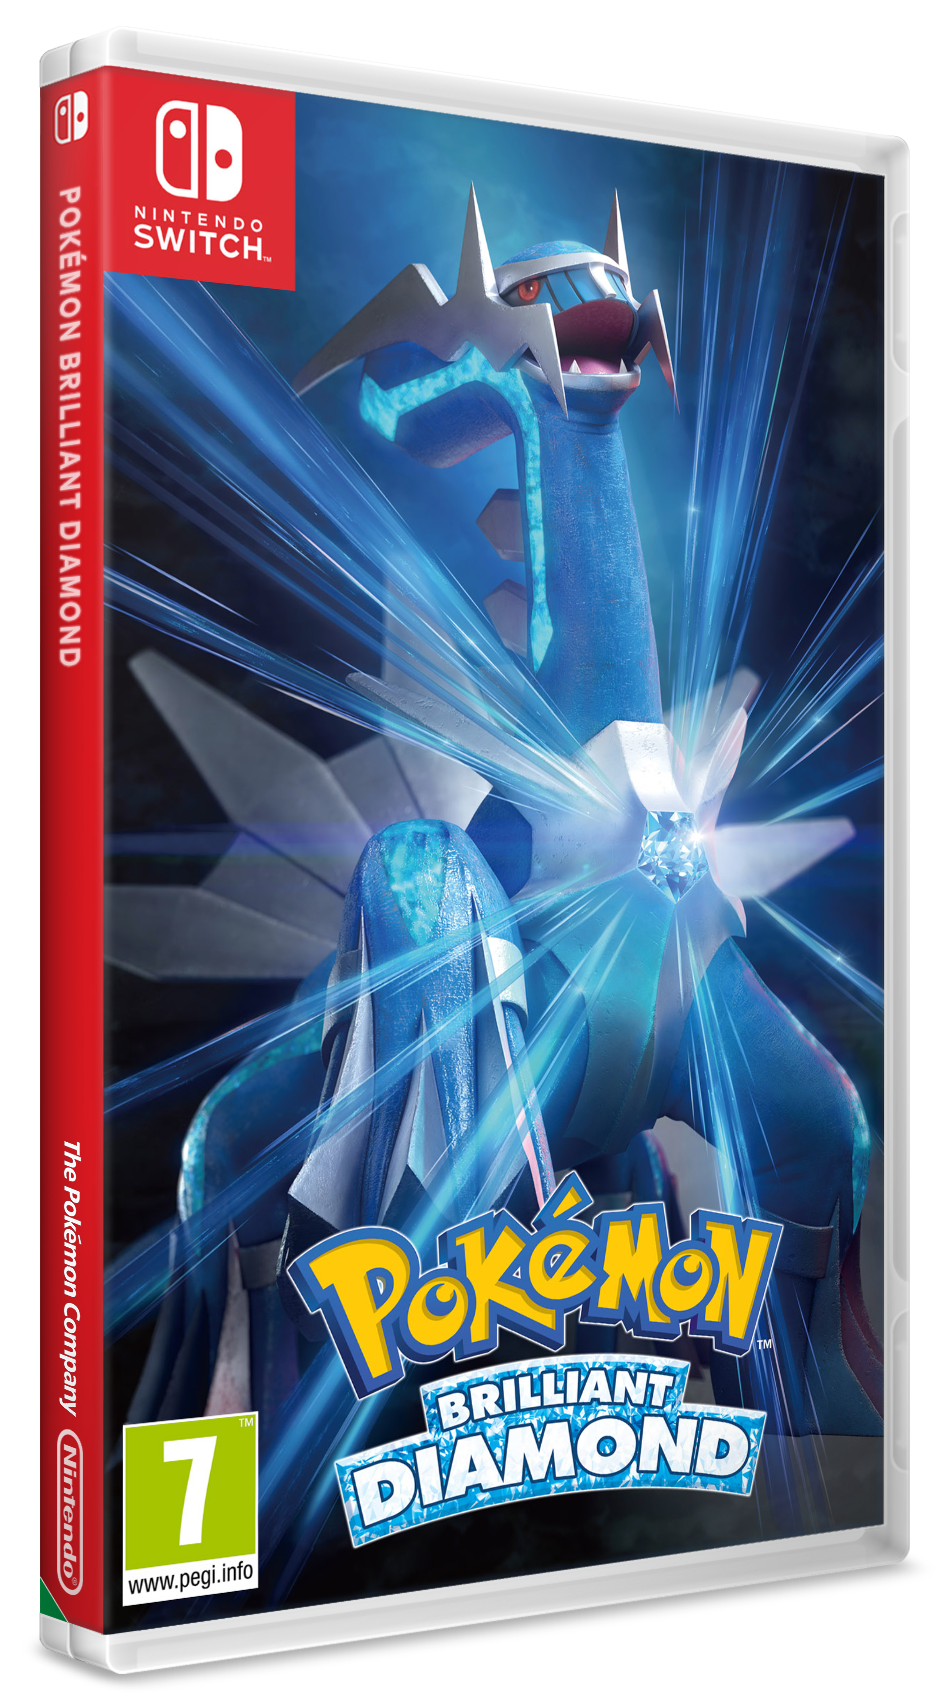 Pokémon Brilliant Diamond cover or packaging material - MobyGames